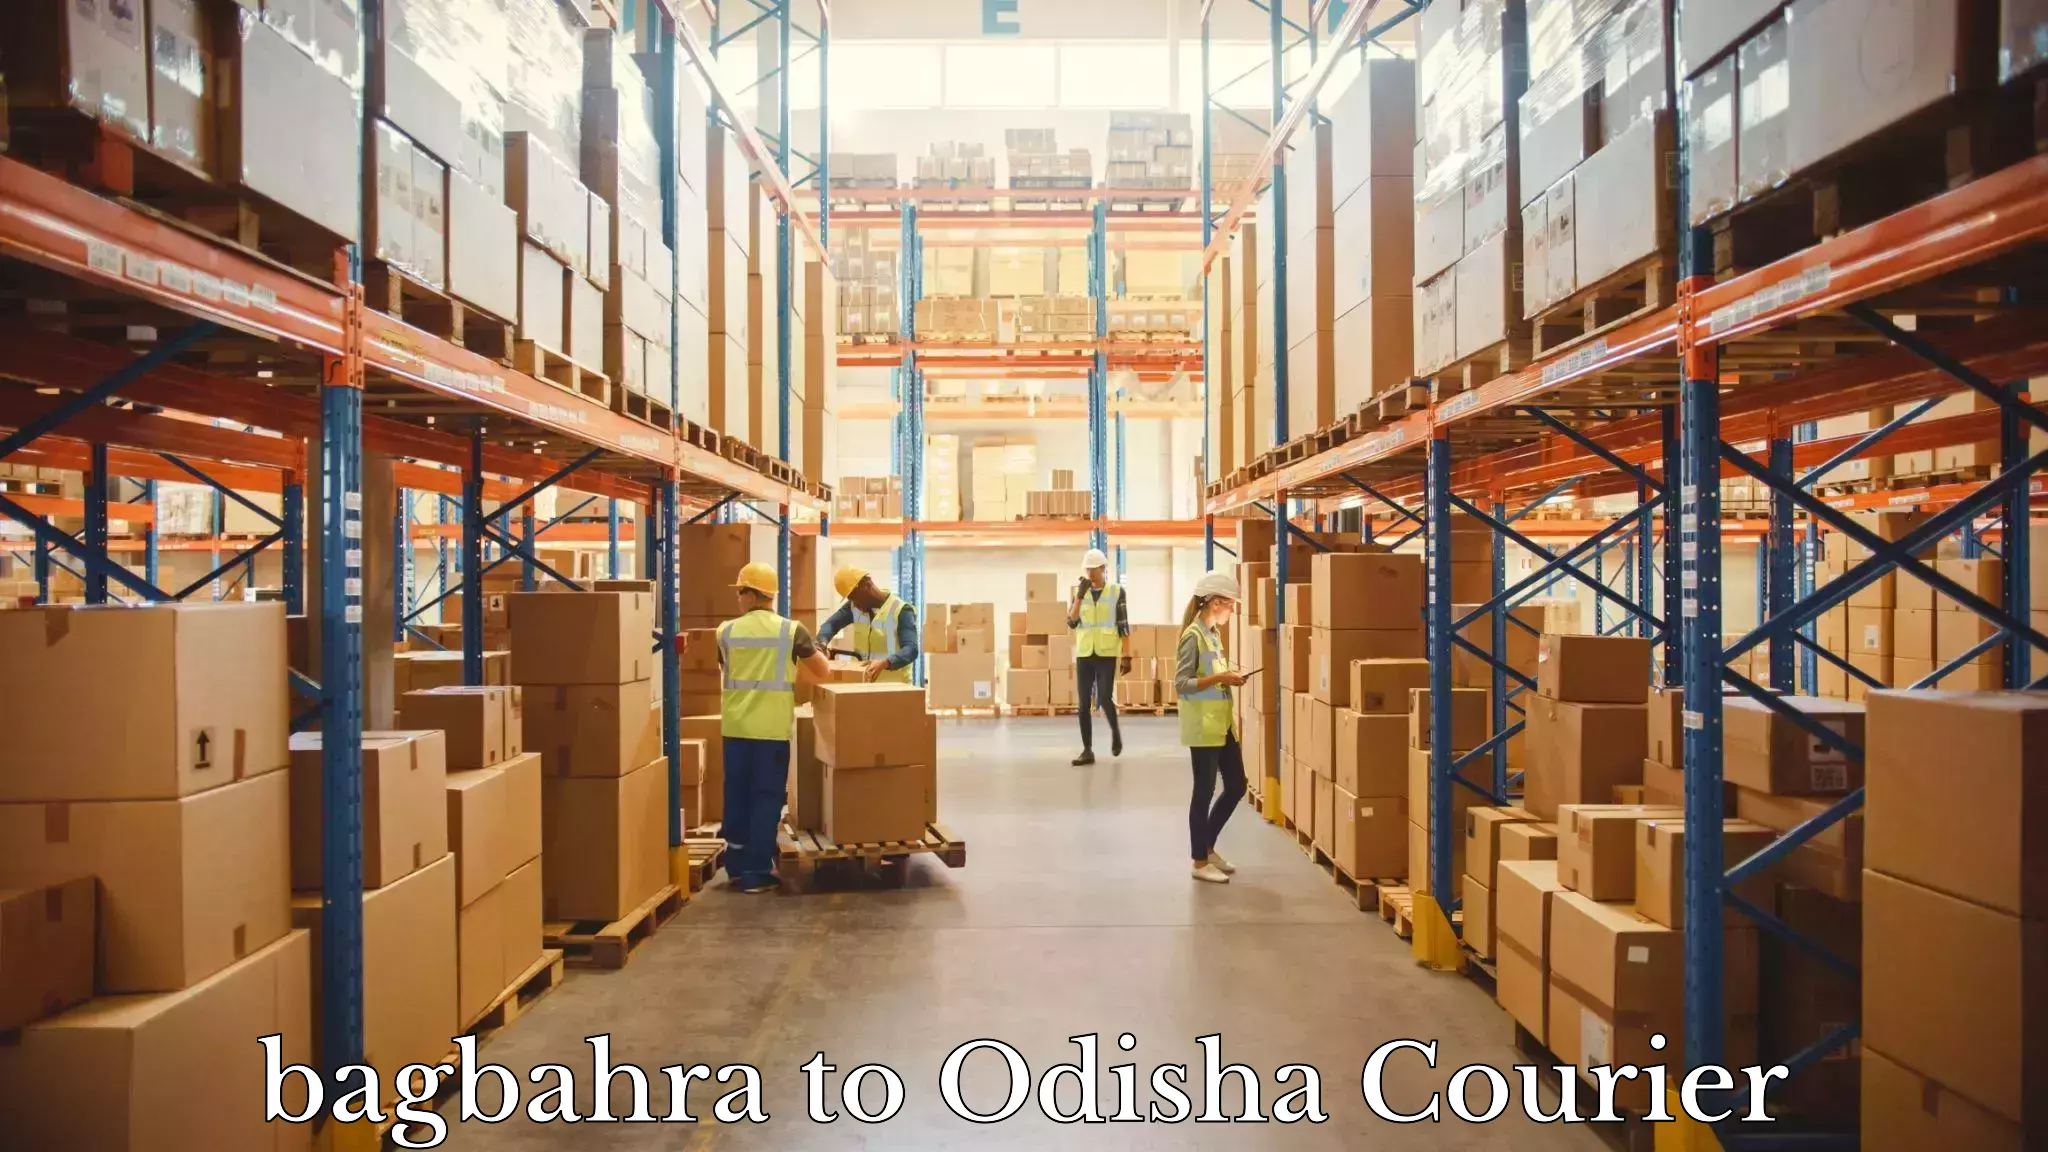 High value parcel delivery in bagbahra to Raikia